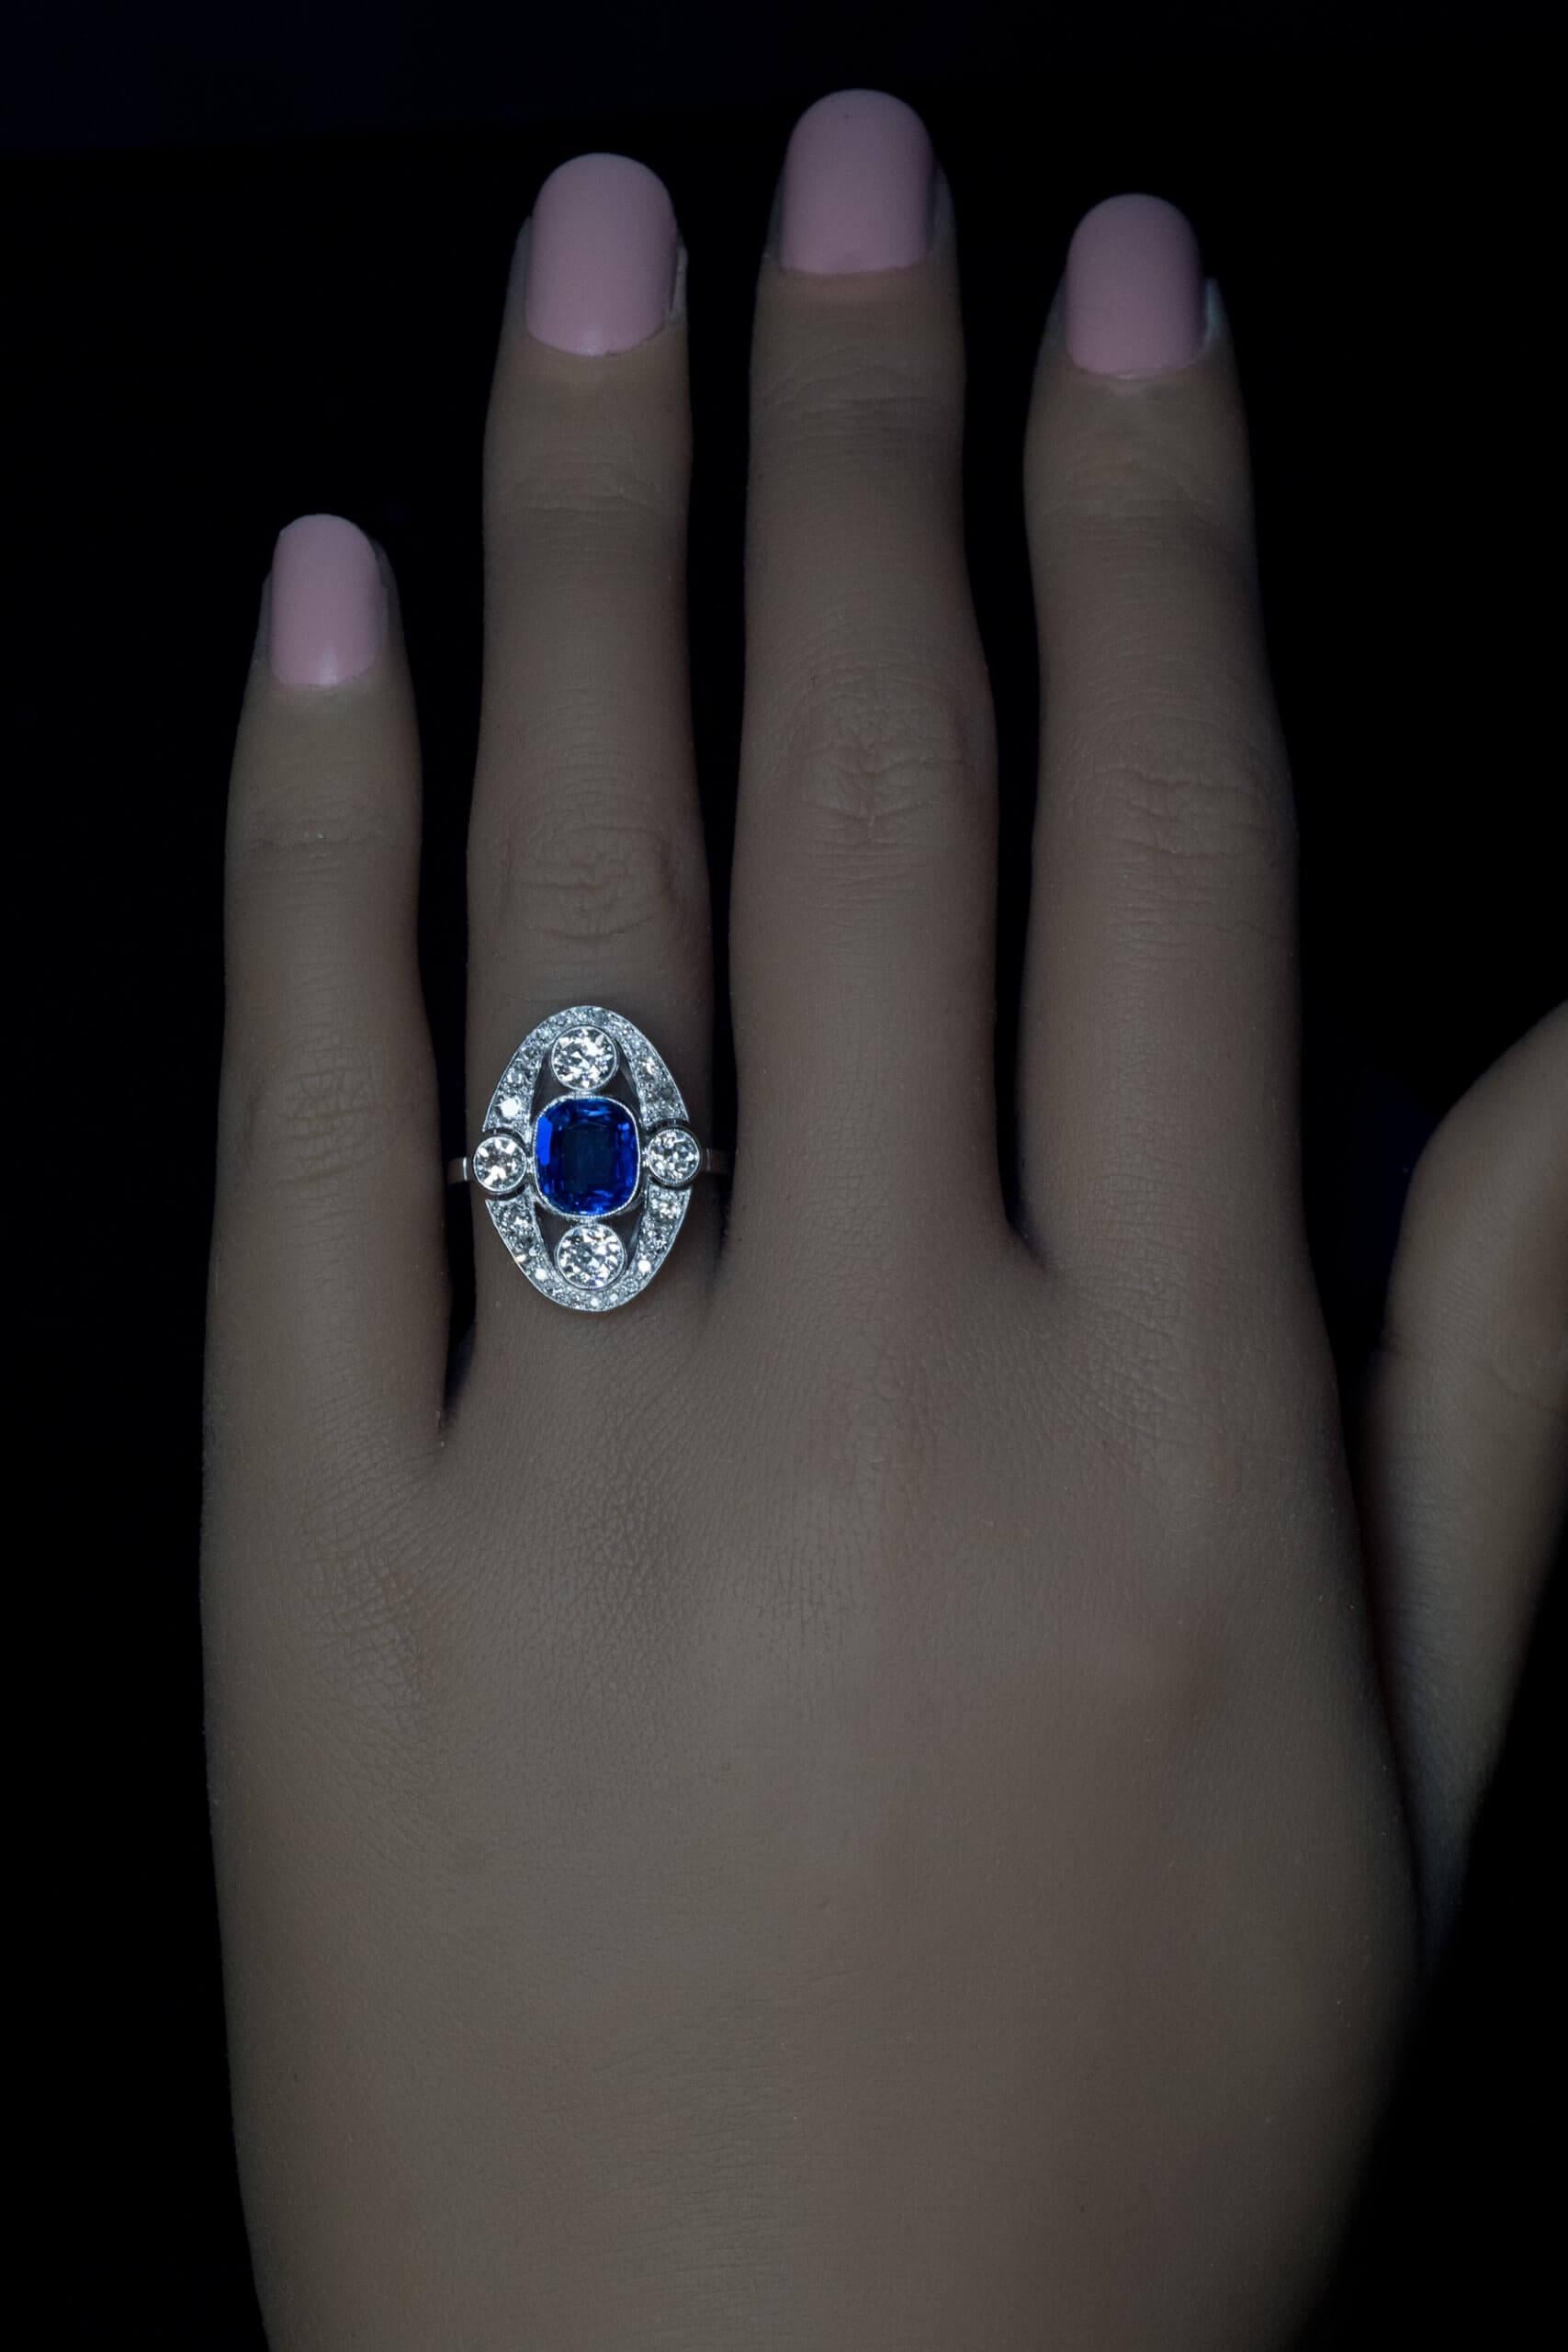 Circa 1920s  This Art Deco era platinum ring features a 1.92 carat natural unheated sapphire from Ceylon of beautiful royal blue color. The sapphire is framed by bright white old European and old mine cut diamonds (G-H color, VS1-VS2 clarity). 